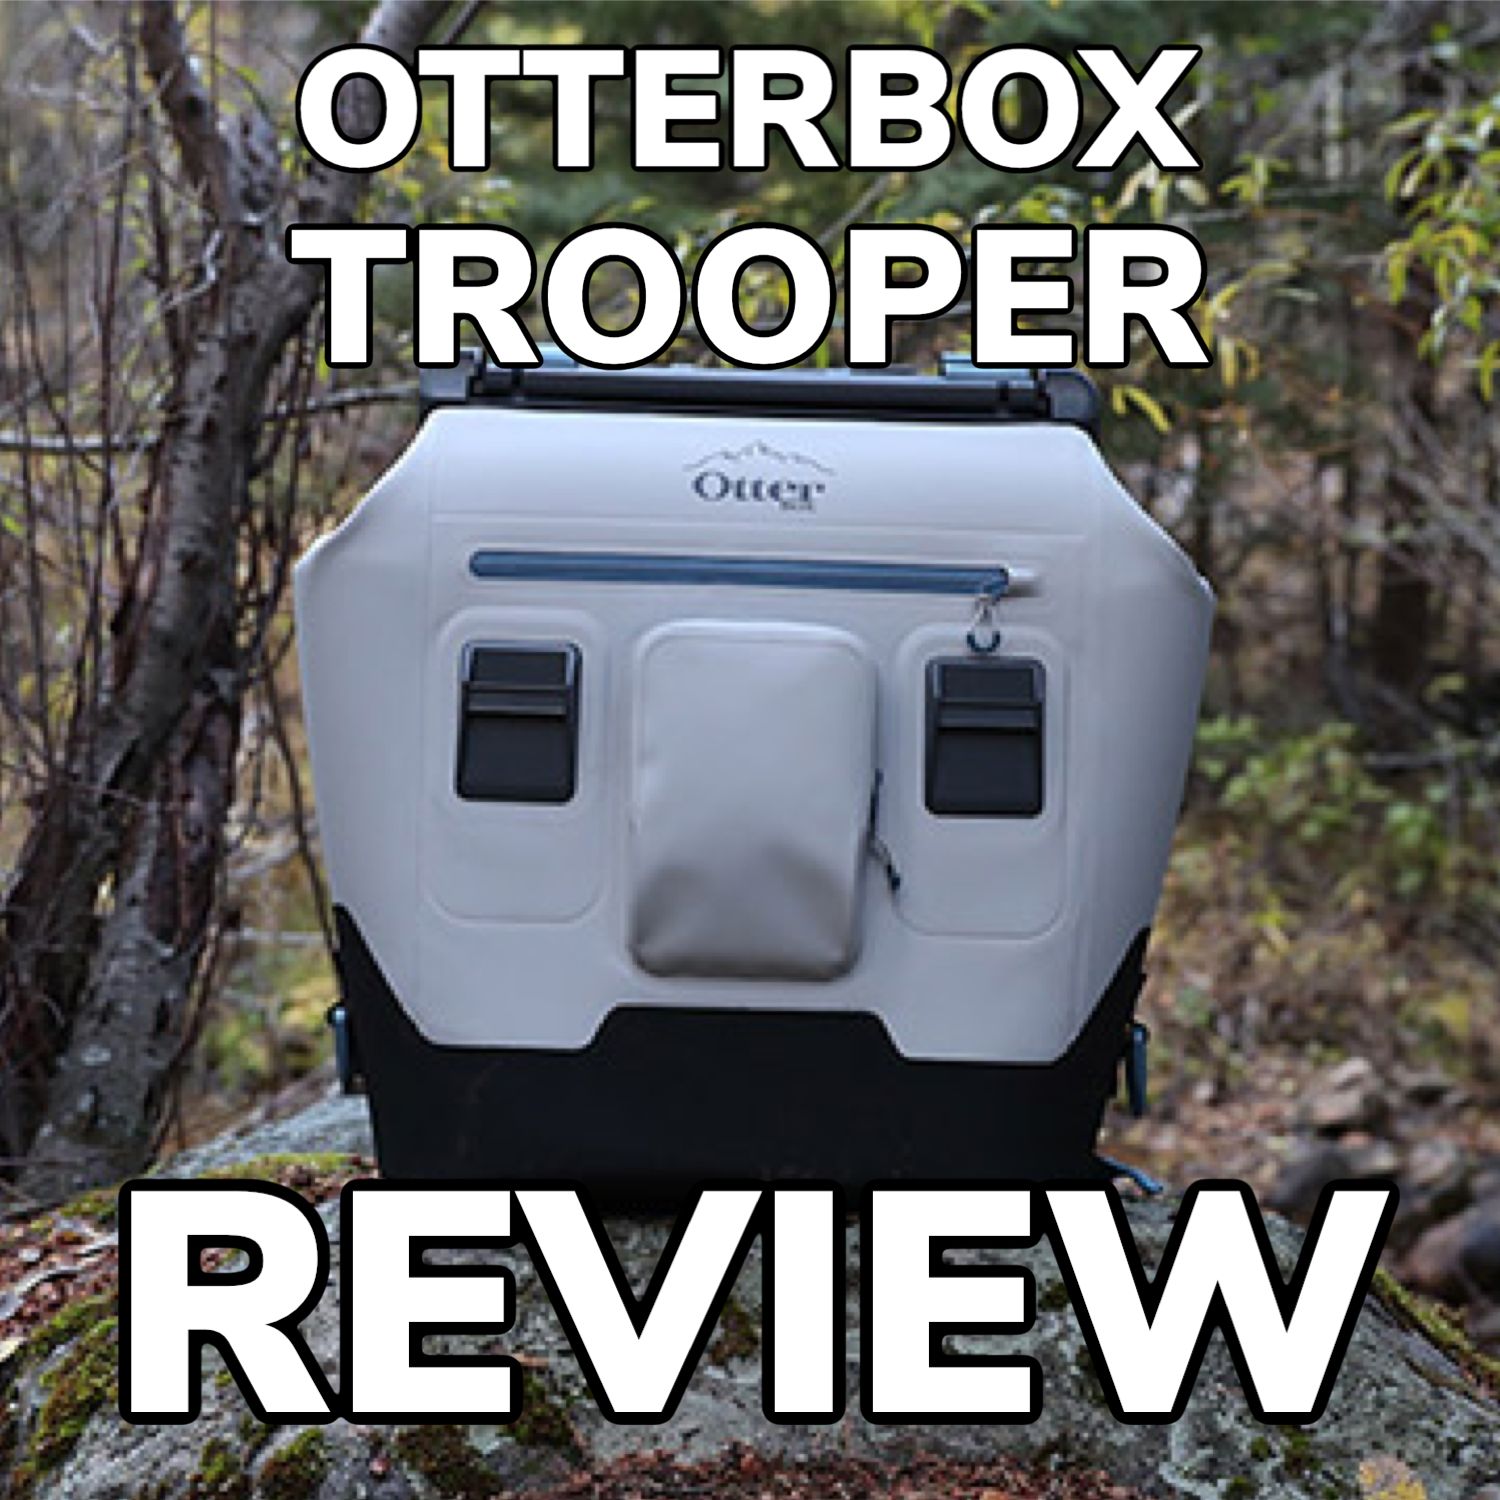 OtterBox Trooper LT30 Backpack Cooler Review: One Of The Best Backpack Coolers